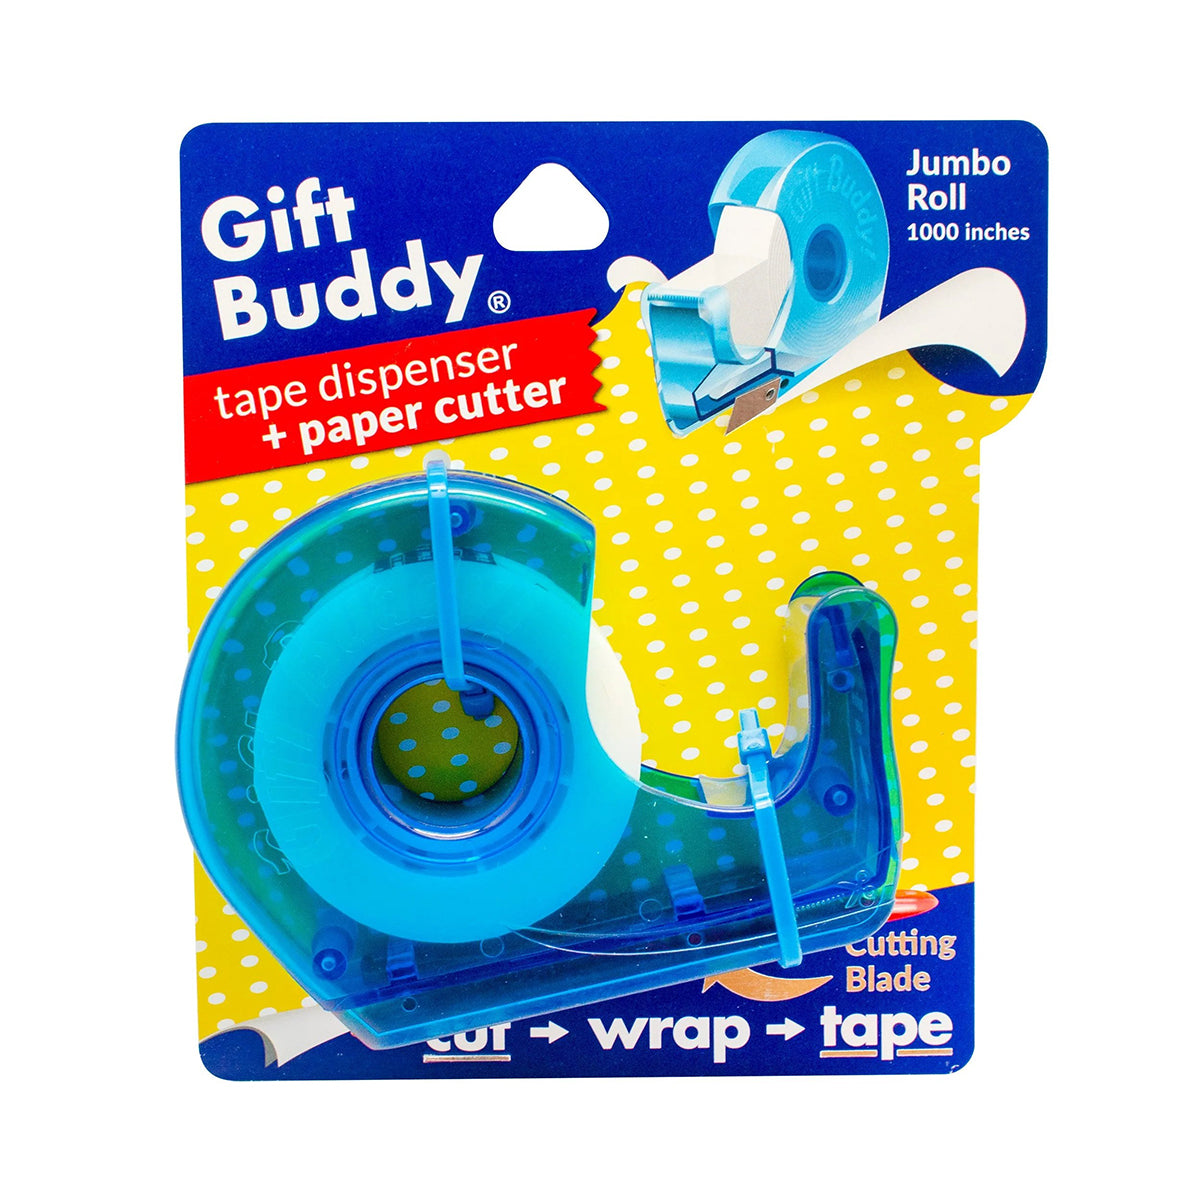 Gift Buddy Tape Dispenser-Paper Cutter By Jacent - Easy Wrapping